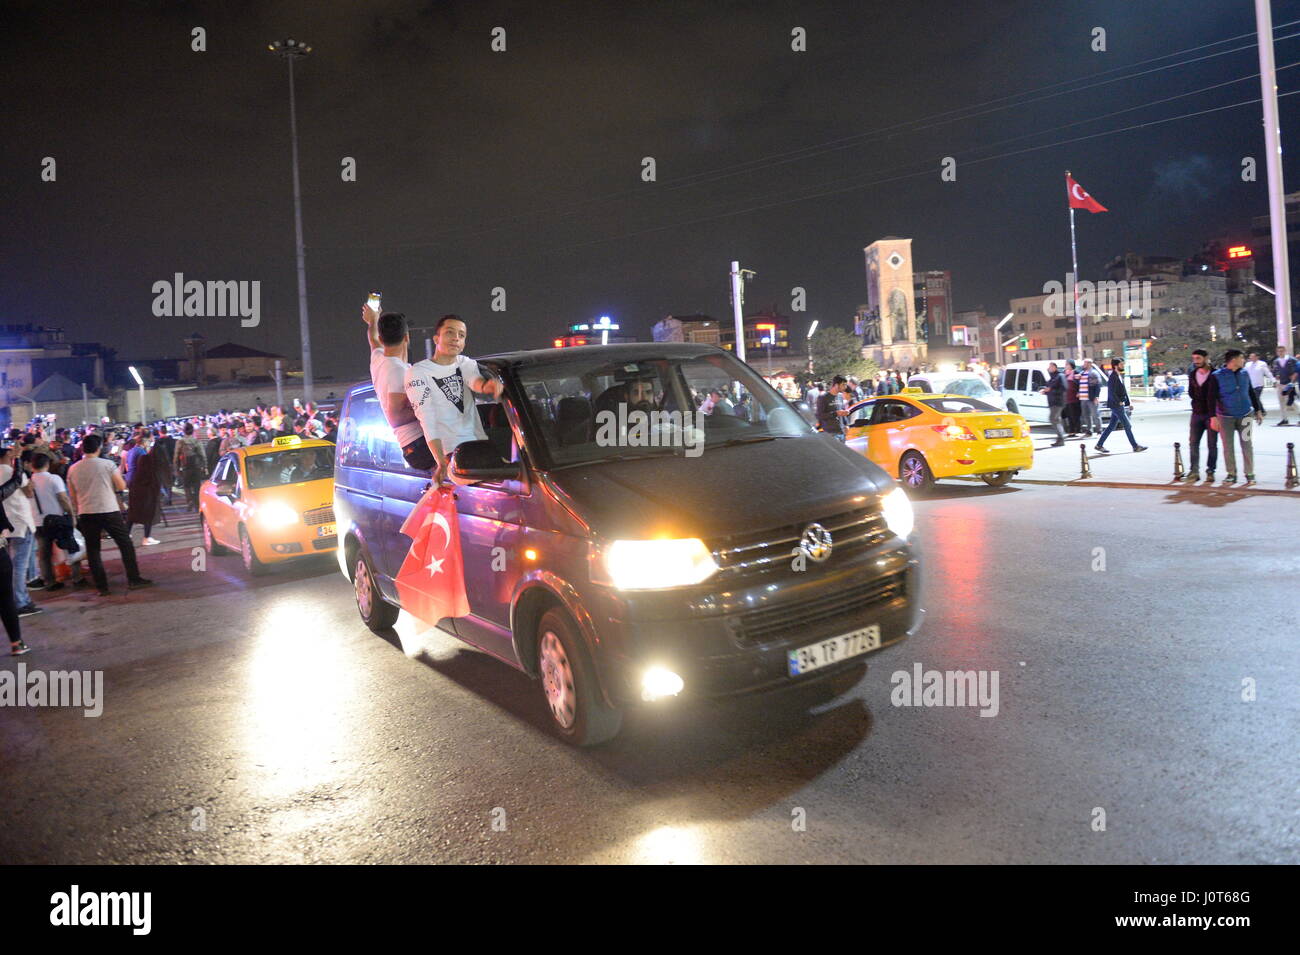 Istanbul, Turkey. 16th Apr, 2017. Enumeration rate according to TV stations over 98 percent of votes: 51.4 percent for constitutional change. Erdoğan speaks of victory. Credit: Franz Perc / Alamy Live News Stock Photo